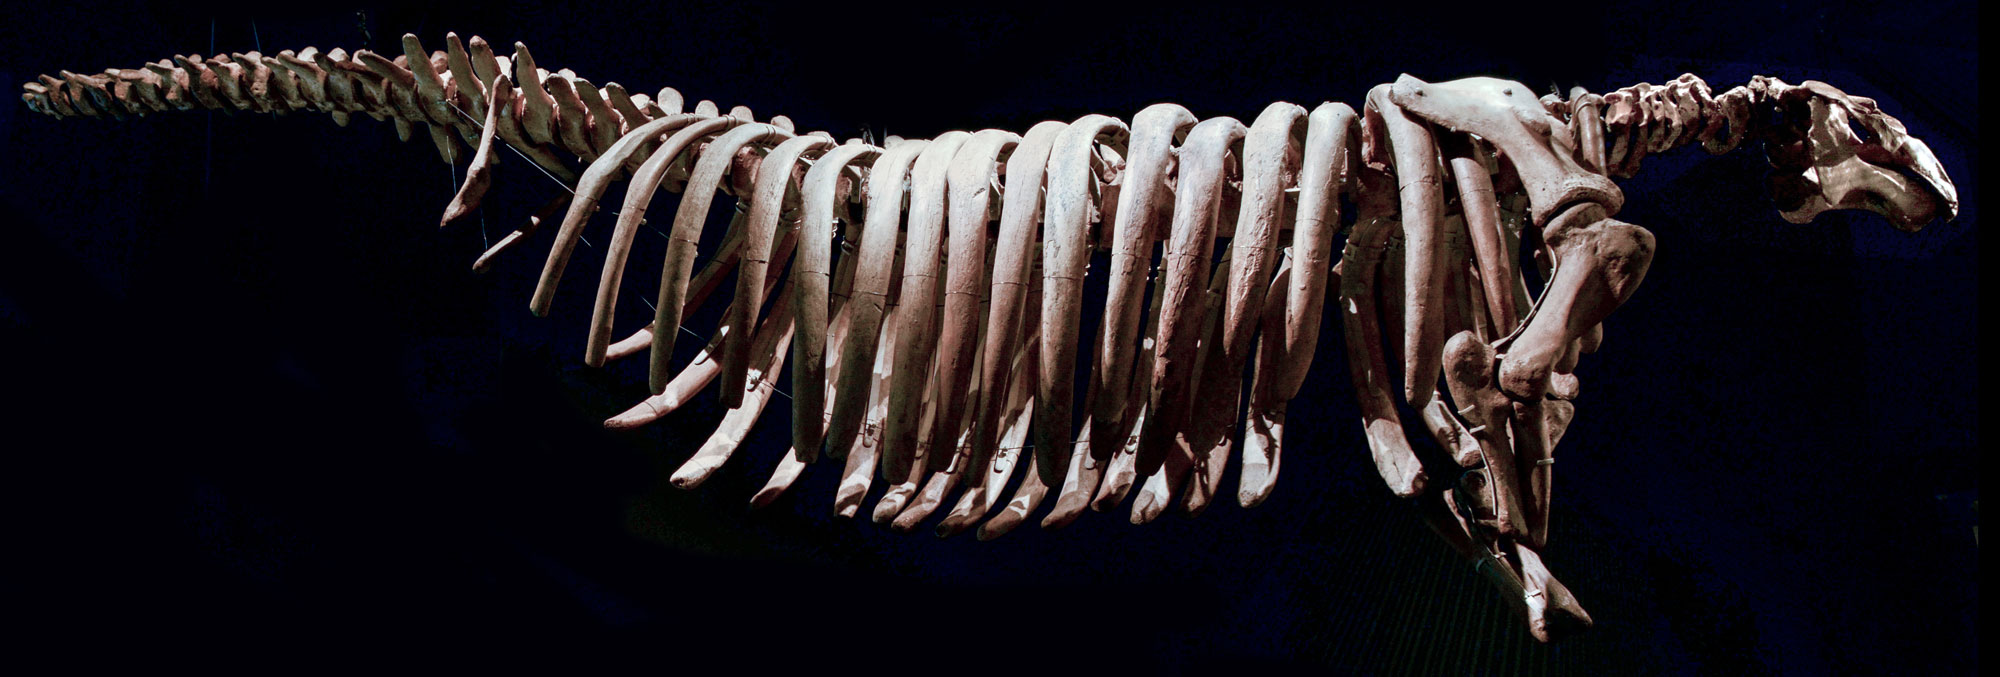 Photograph of a Steller's sea cow skeleton against a black background. The animal has well-developed forelimbs and poorly developed hindlimbs.